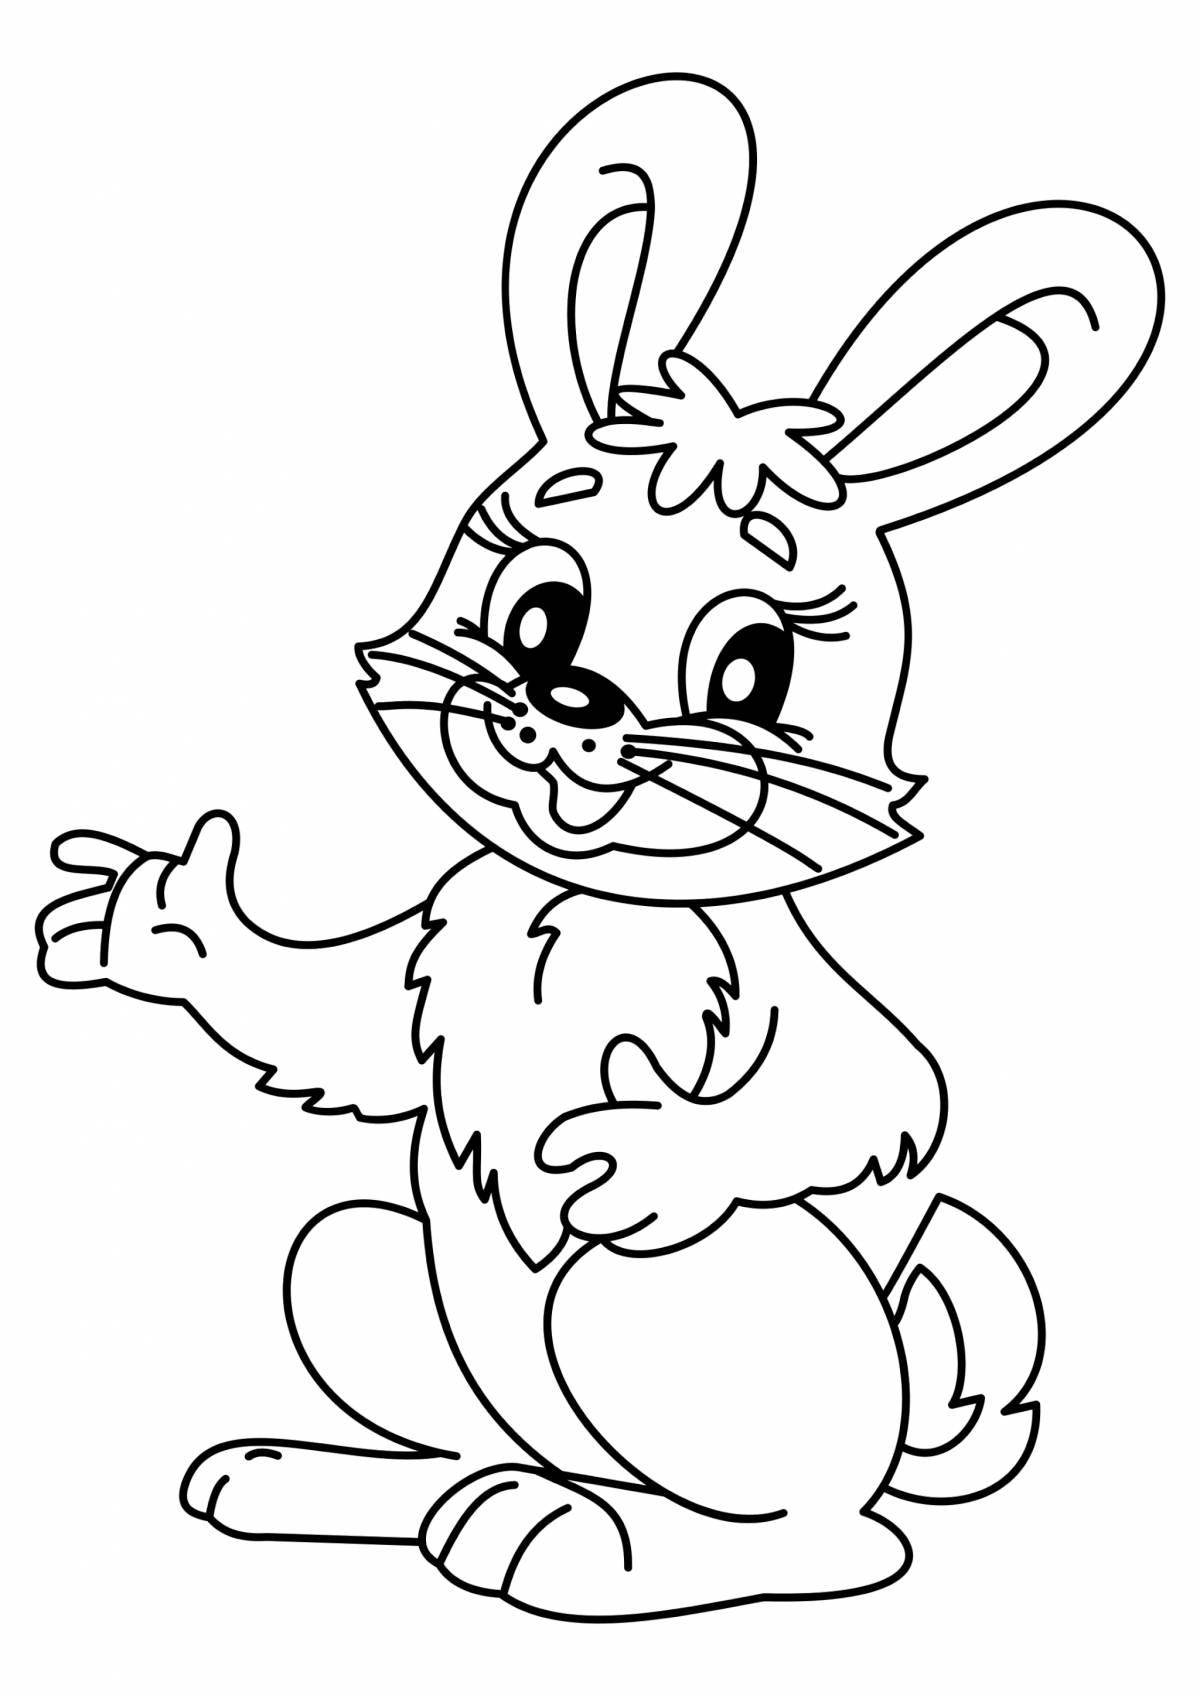 Live coloring page rabbit drawing